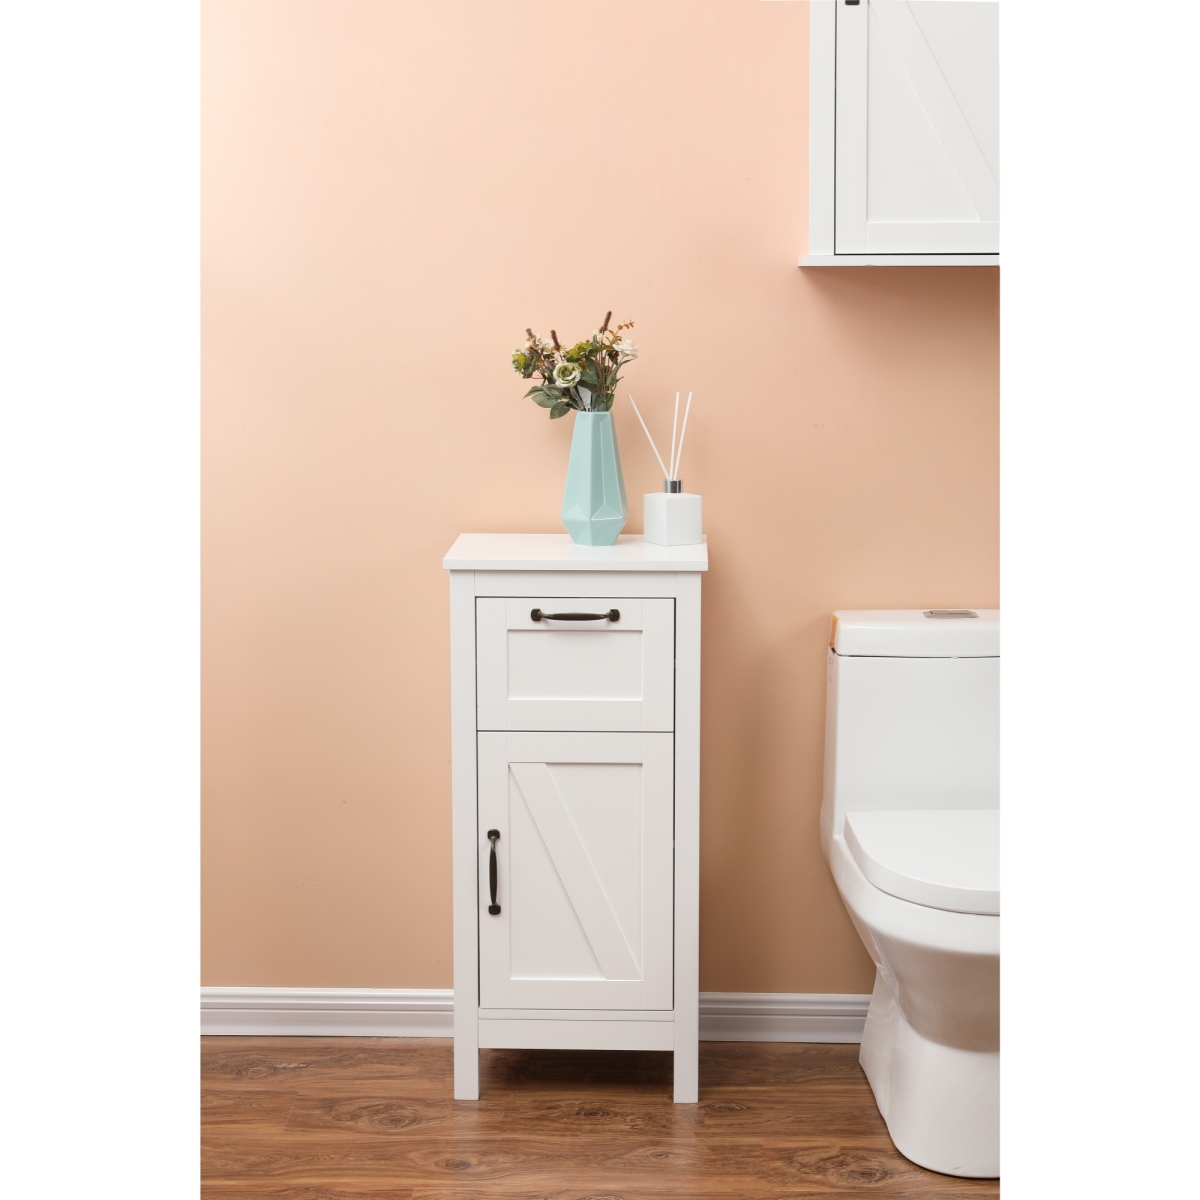 Whif1000 15.1 X 32.1 X 11.8 In. White Mdf 1-door Accent Cabinet